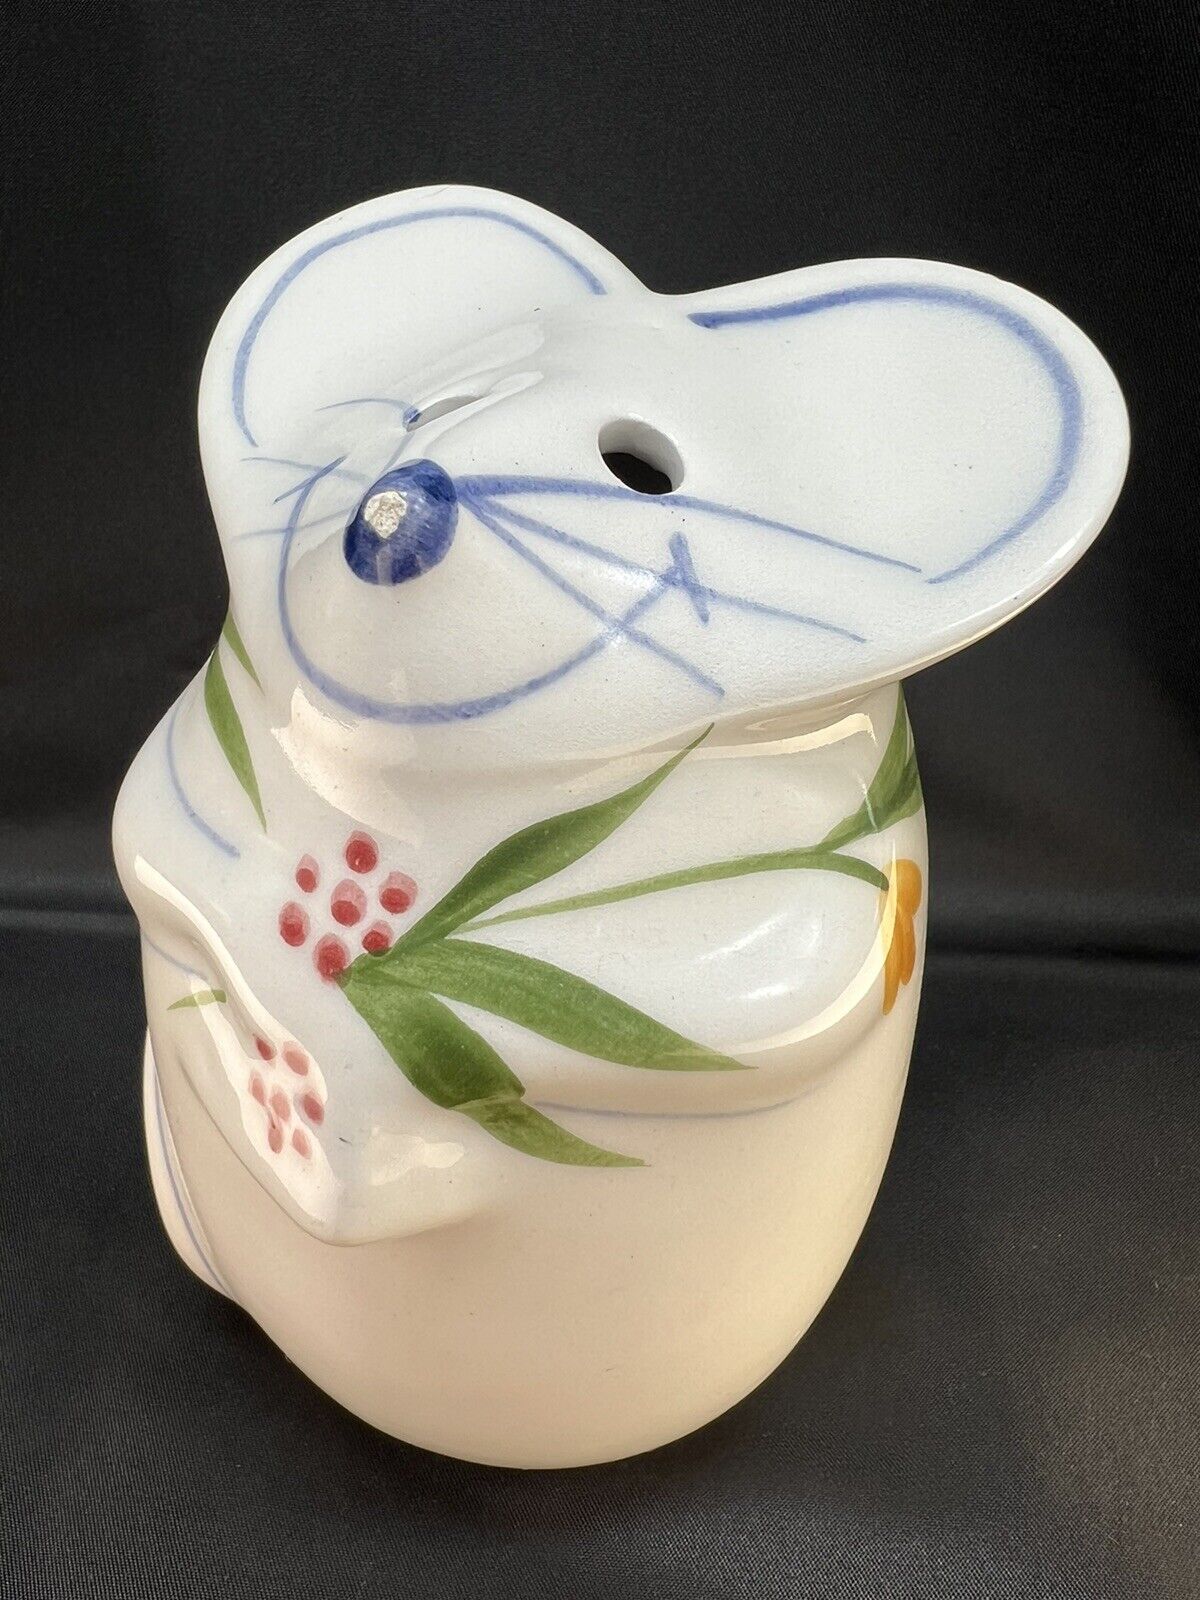 Mouse Kitchen Tool Shaker Container Dispenser Ceramic Hand Painted Floral VTG